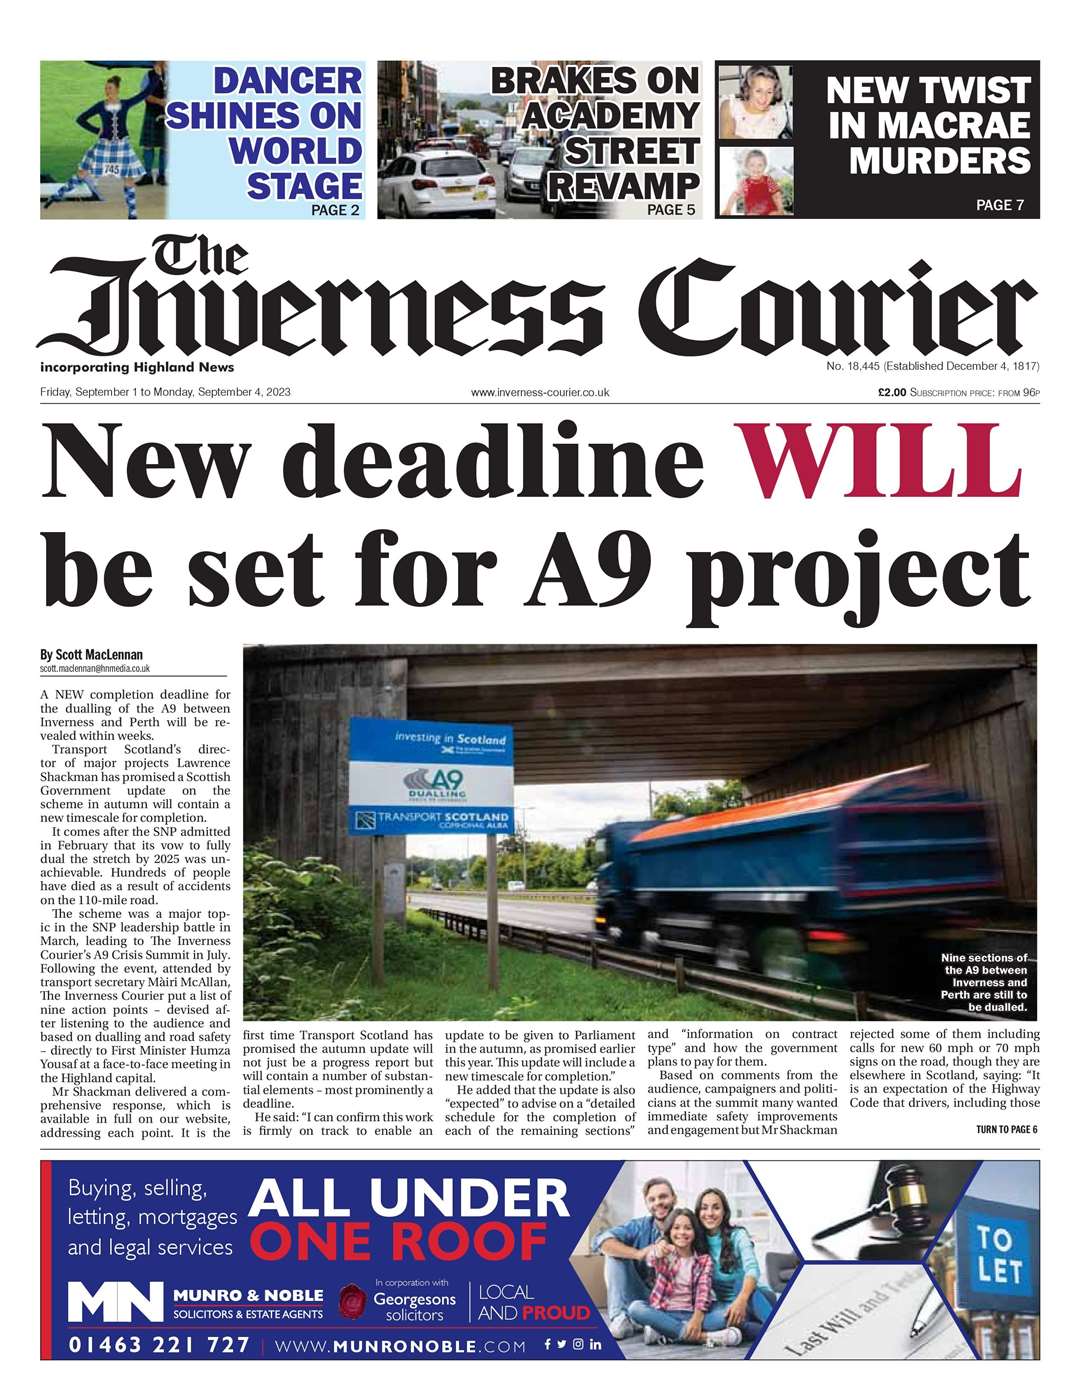 The Inverness Courier, September 1, front page.